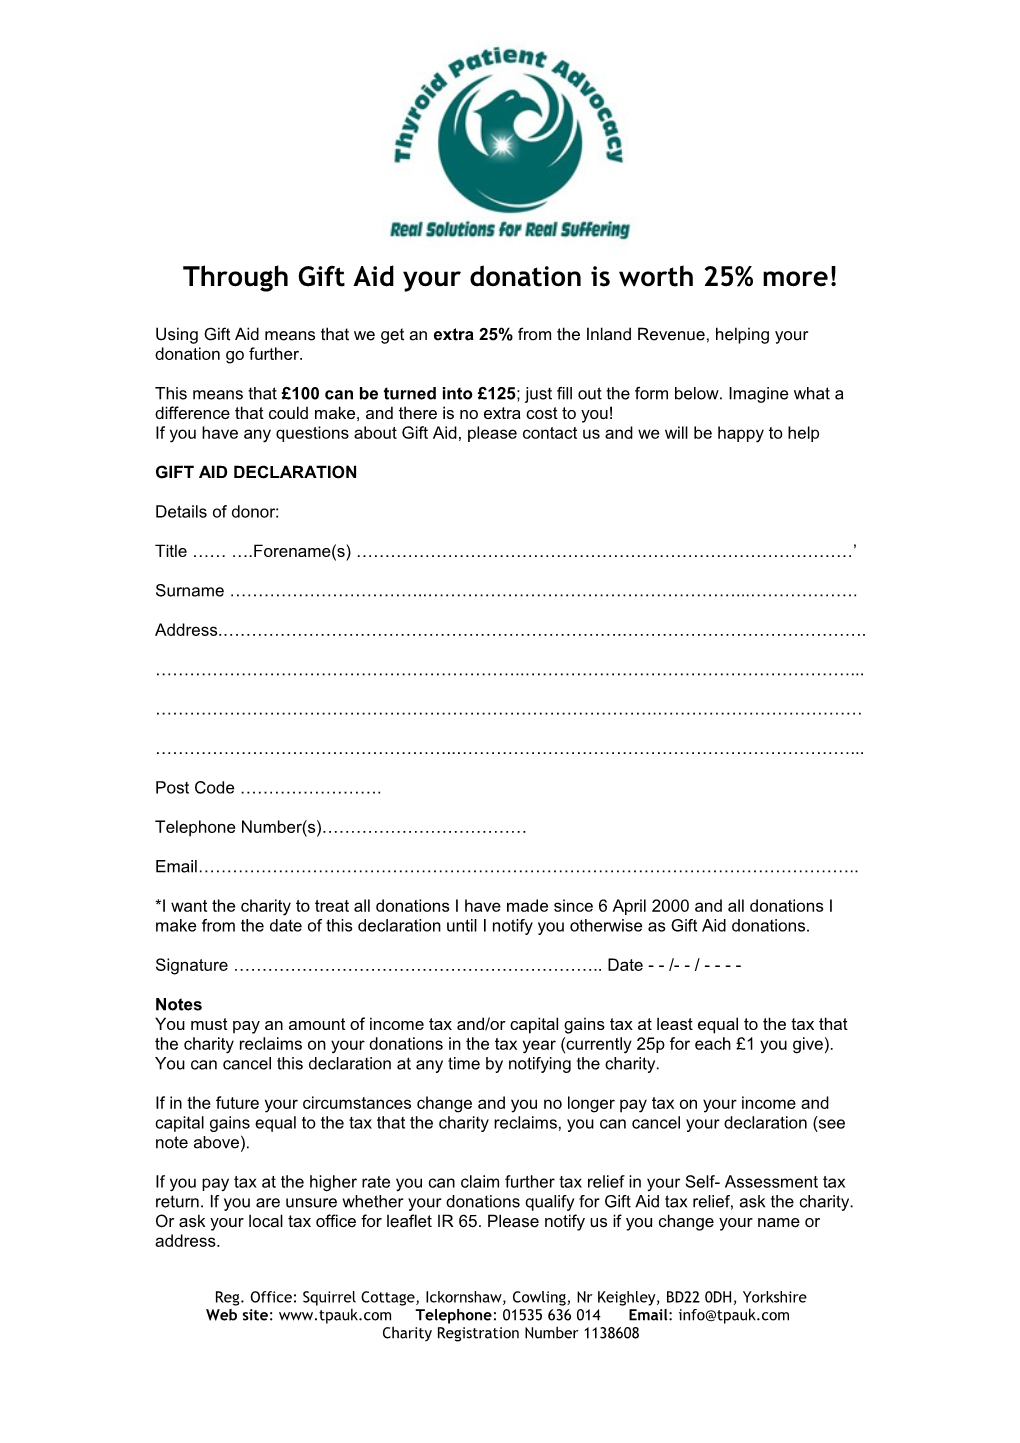 Through Gift Aid Your Donation Isworth 25% More!